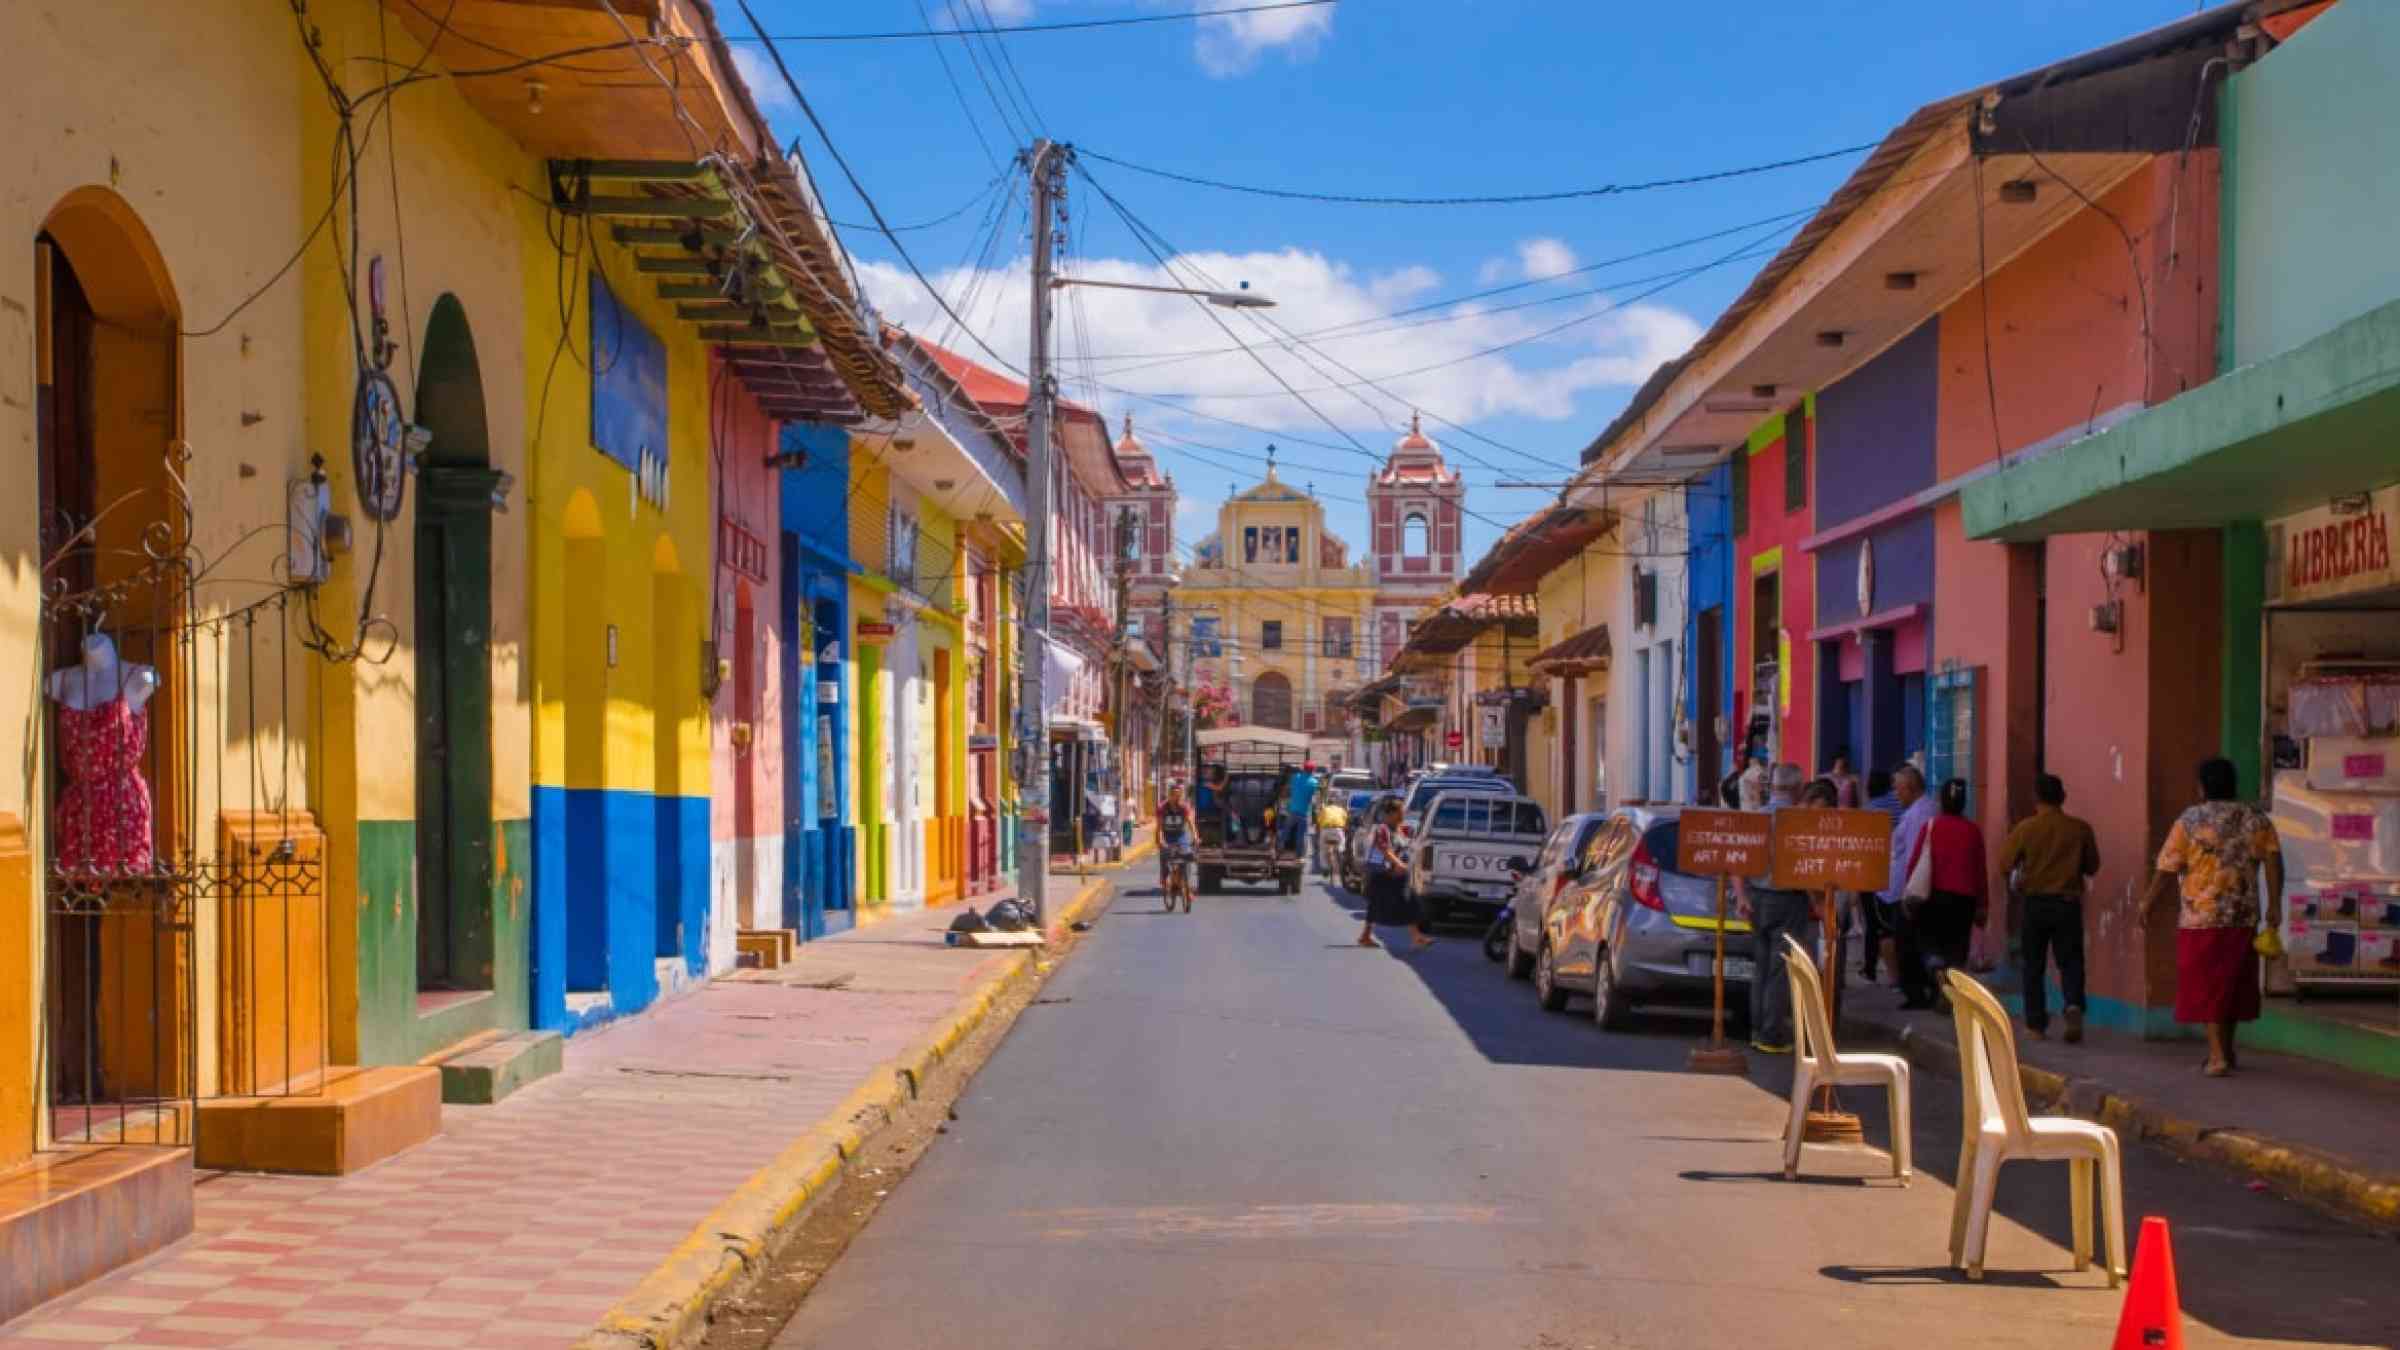 Outdoor view of people on a street in Leon, Nicaragua.